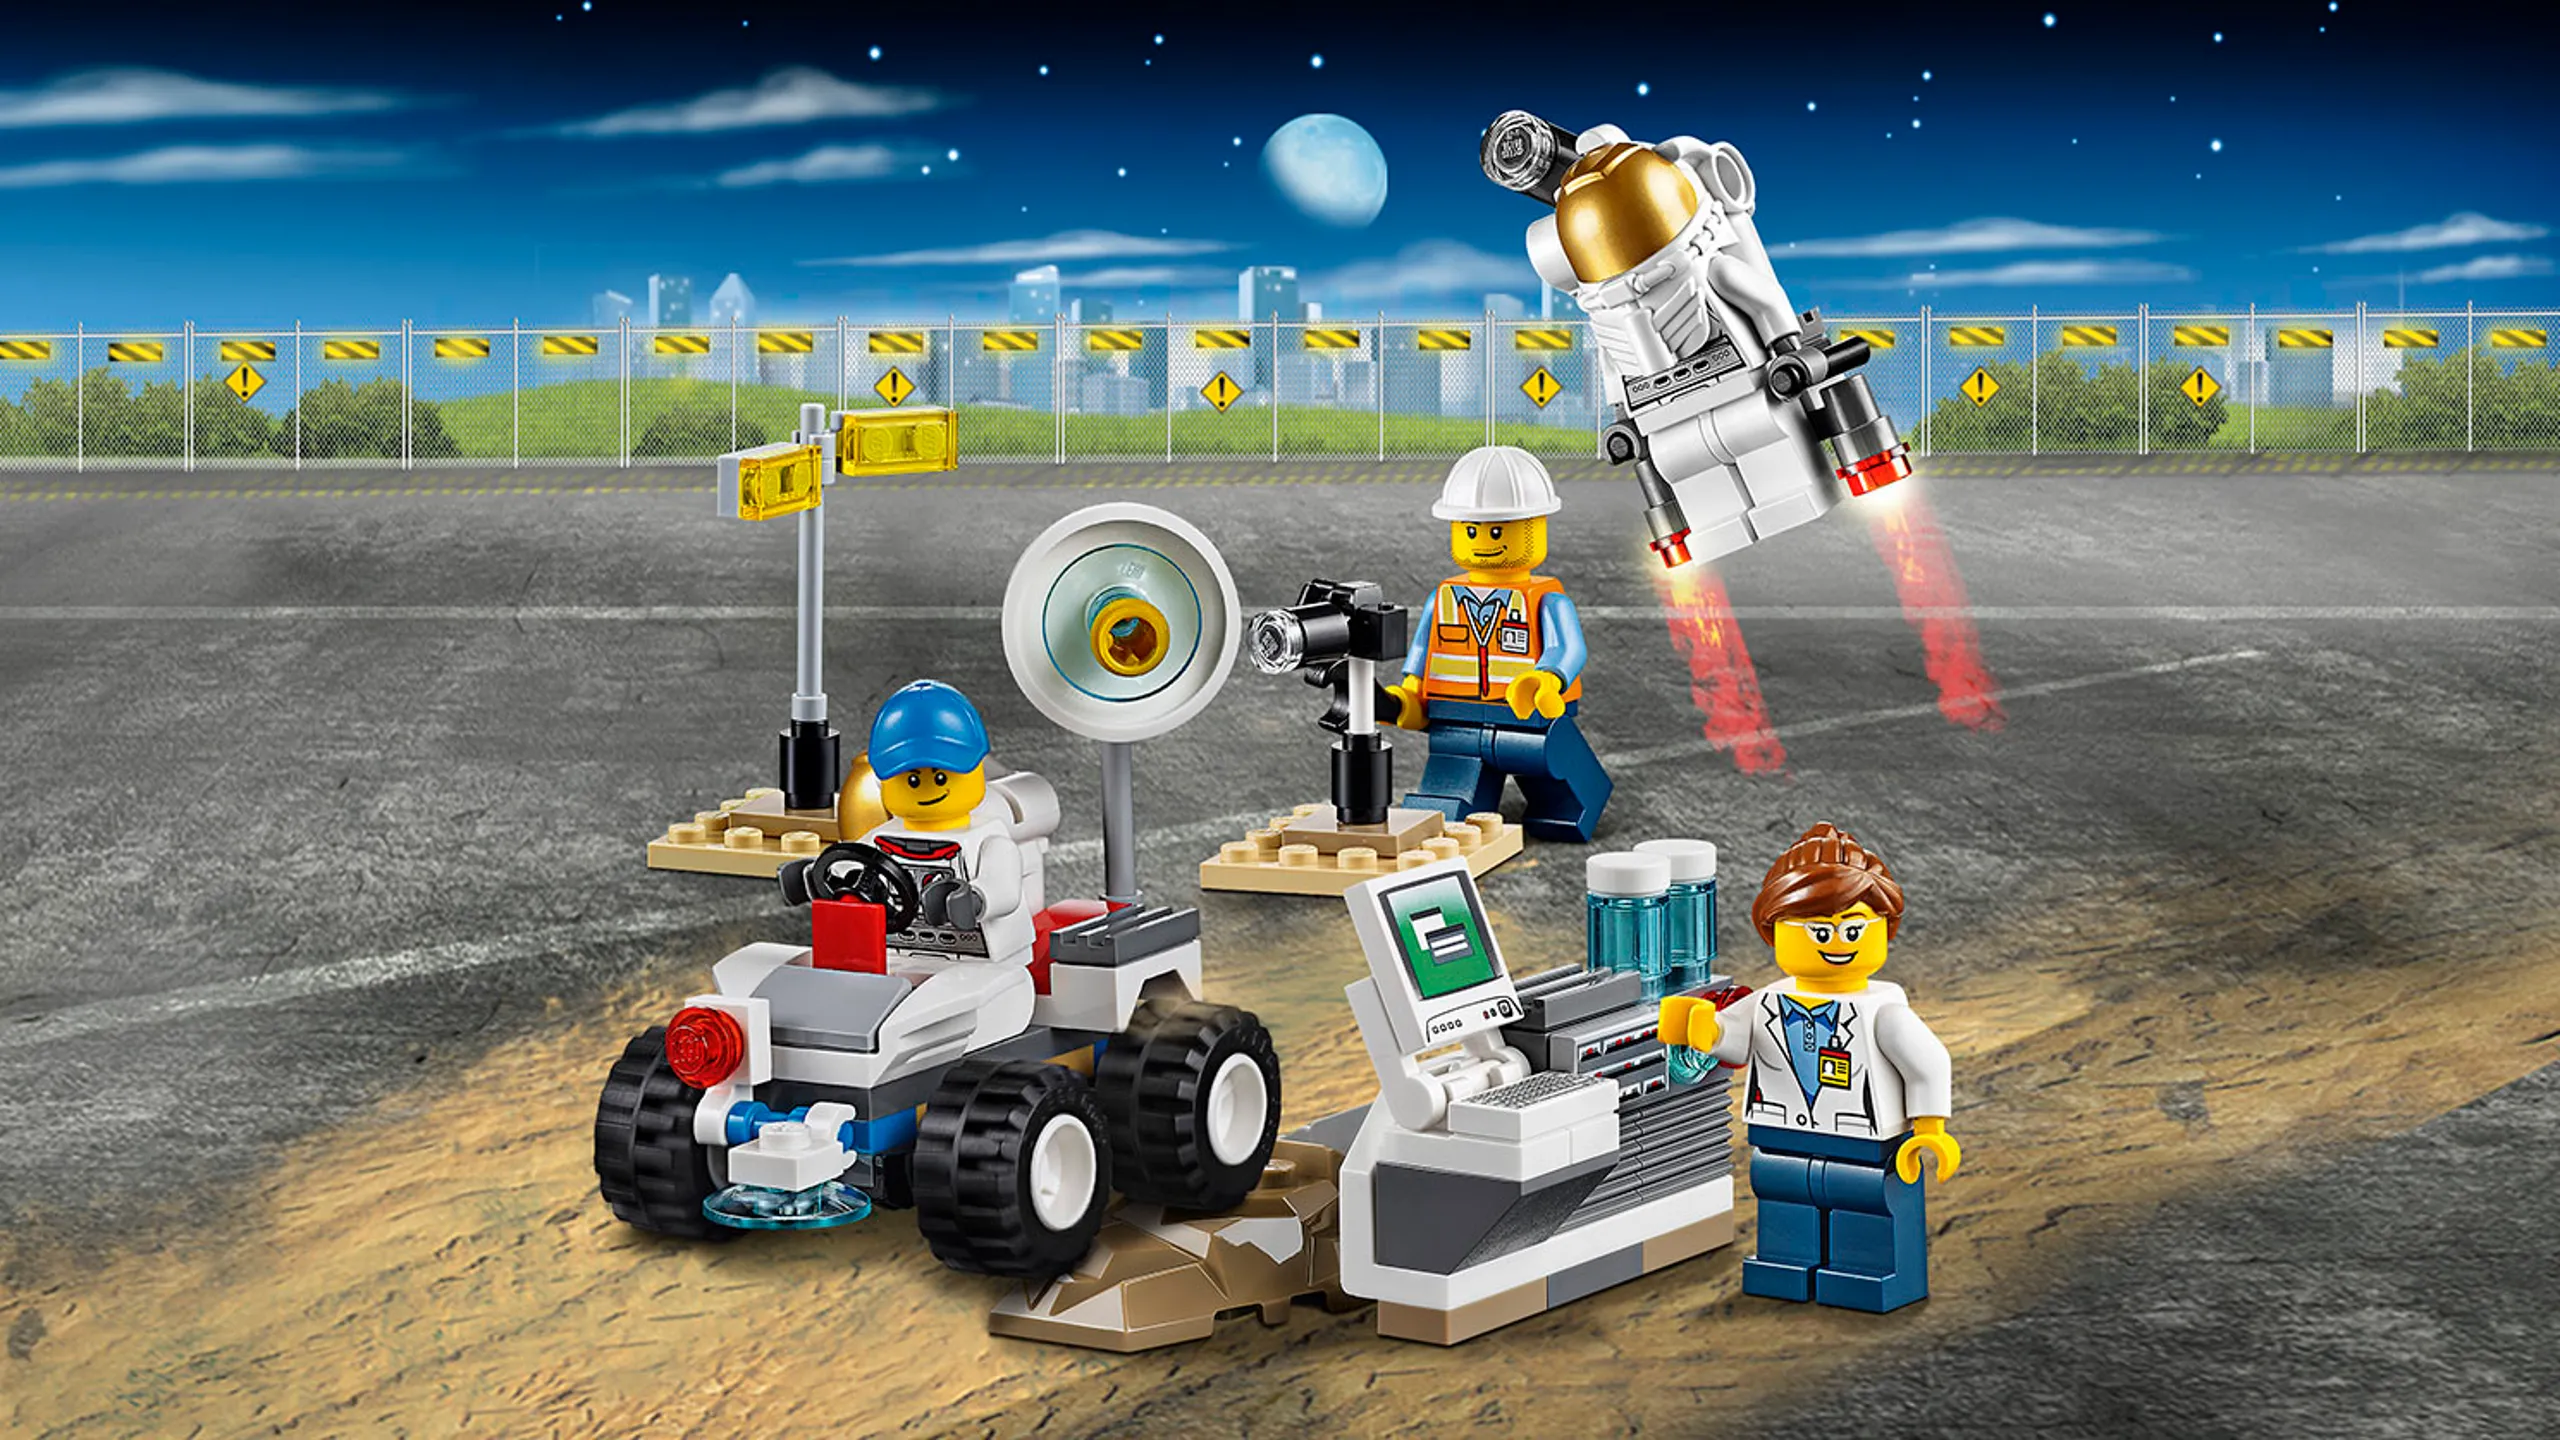 LEGO City Space control crew and astronaut minifigures - Space Starter Set 60077 